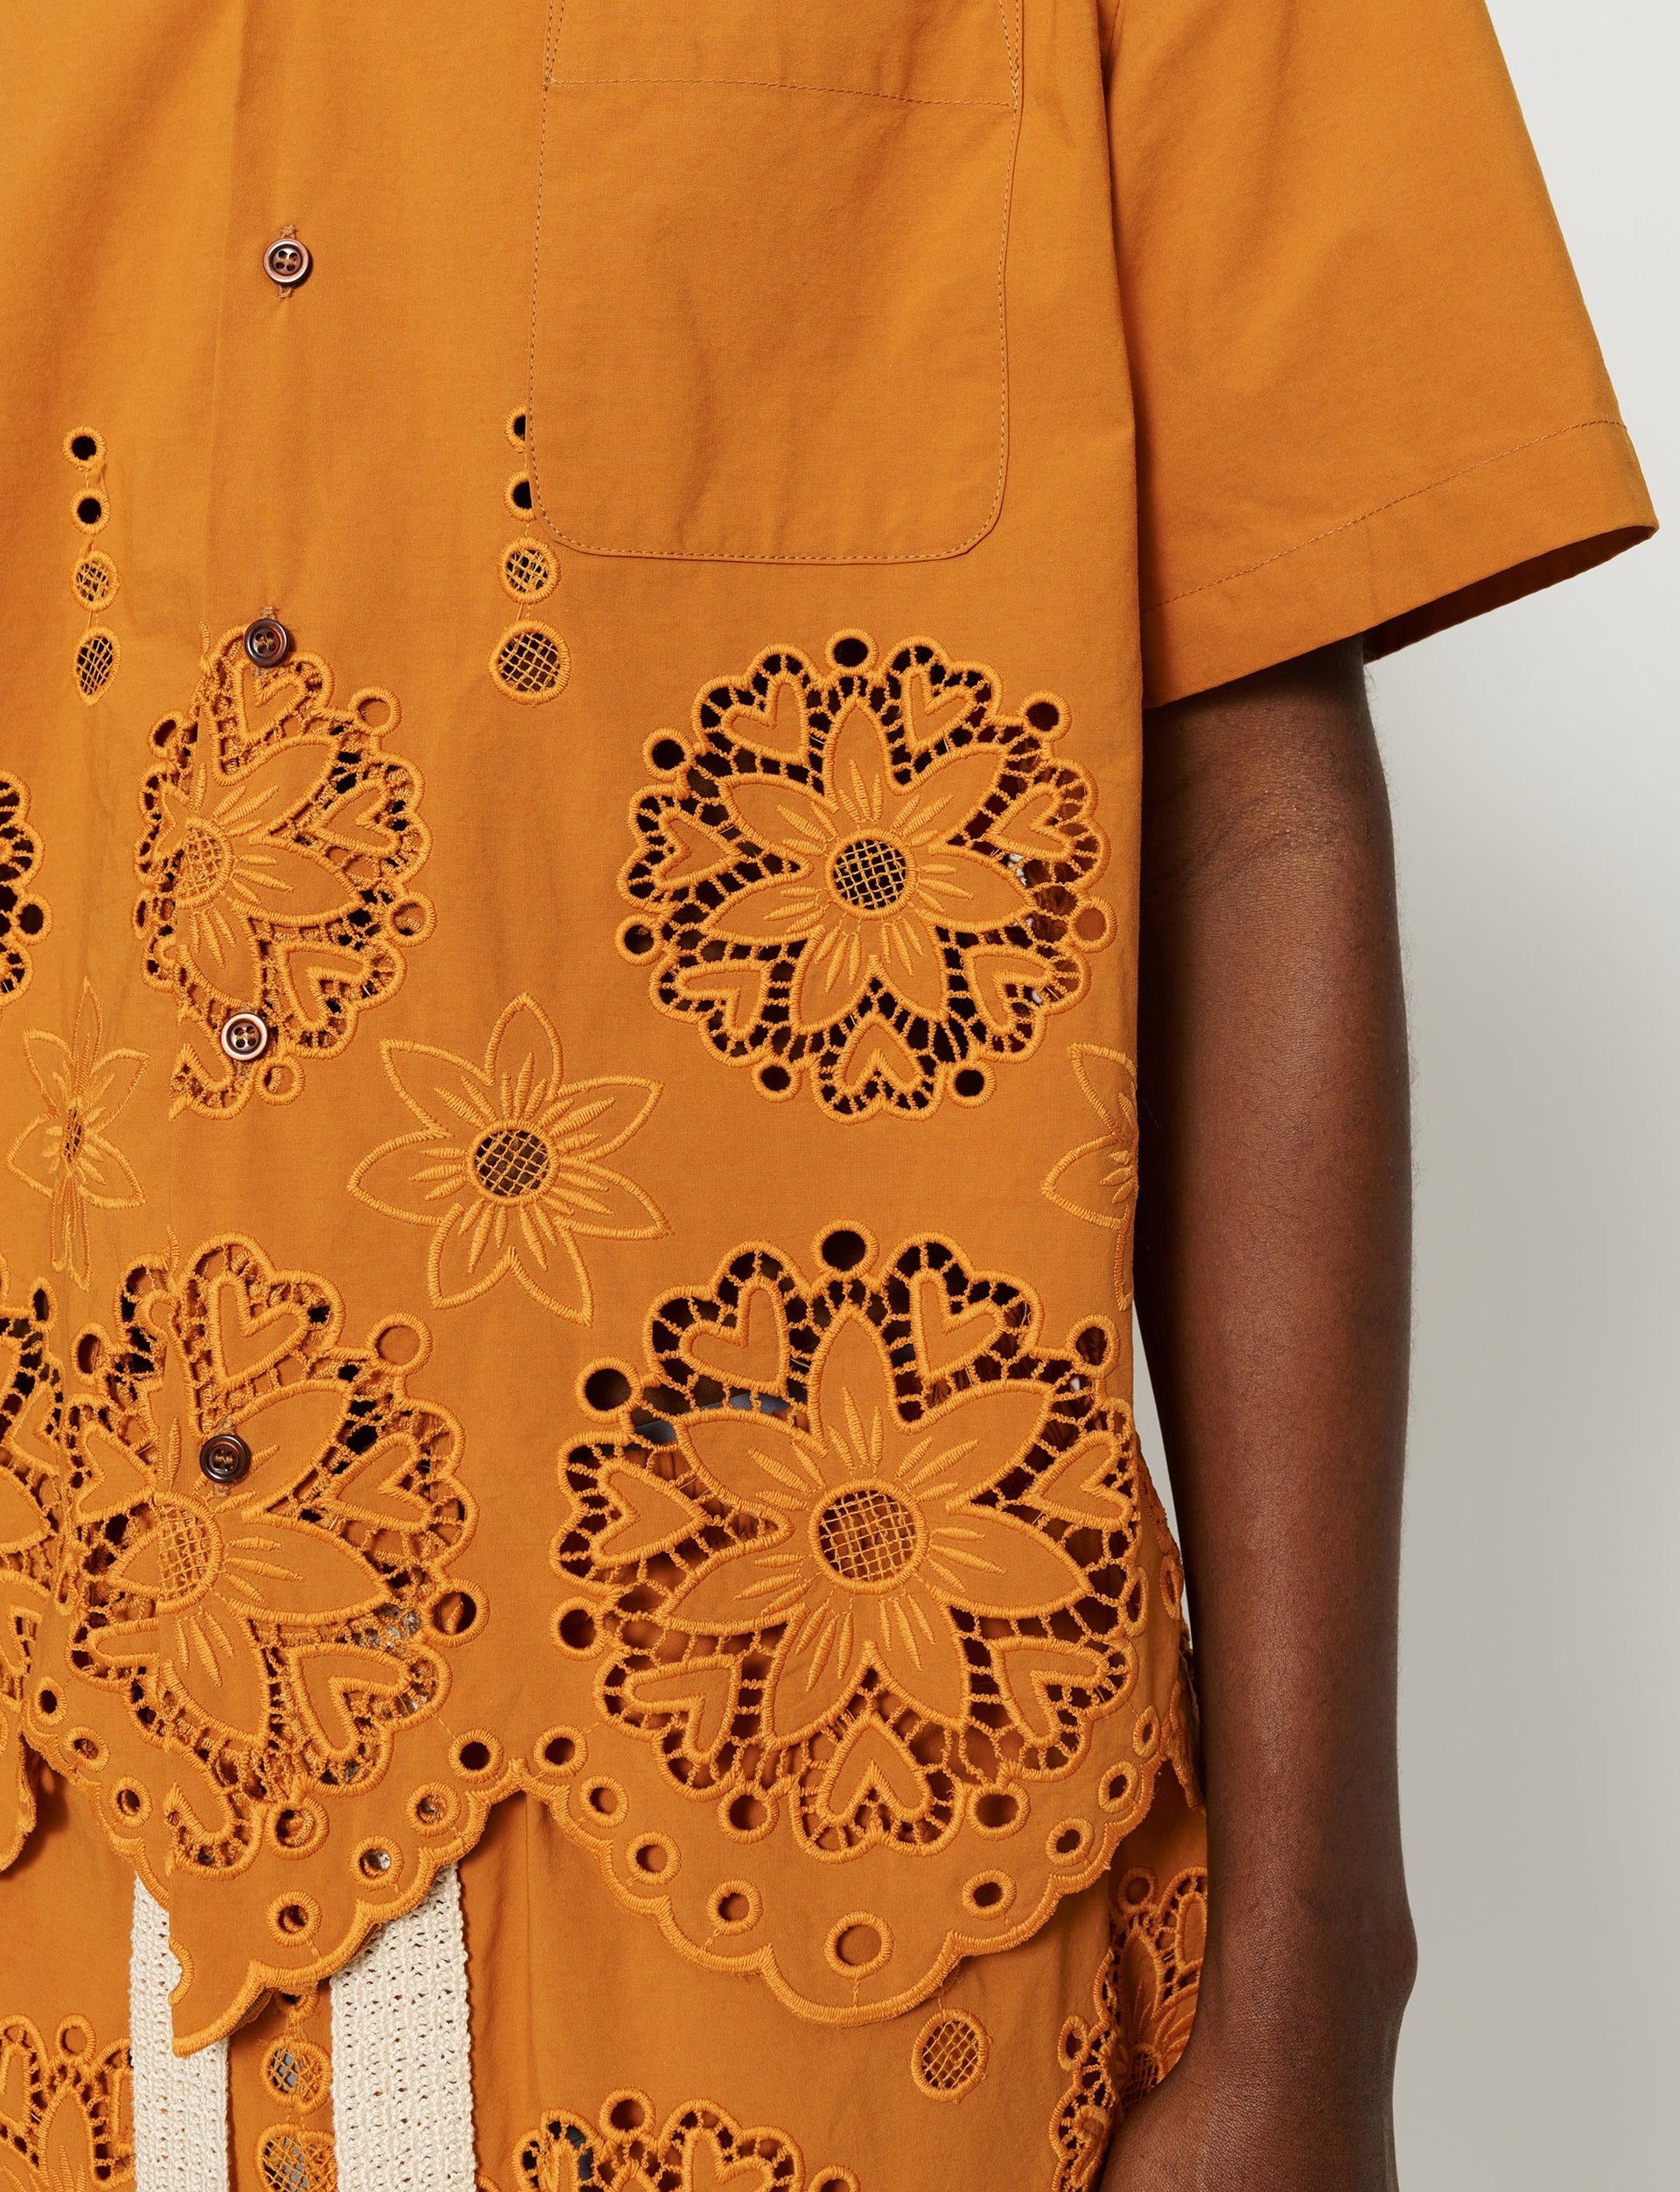 CMMN SWDN TURE EMBROIDERY SHIRT ORANGE